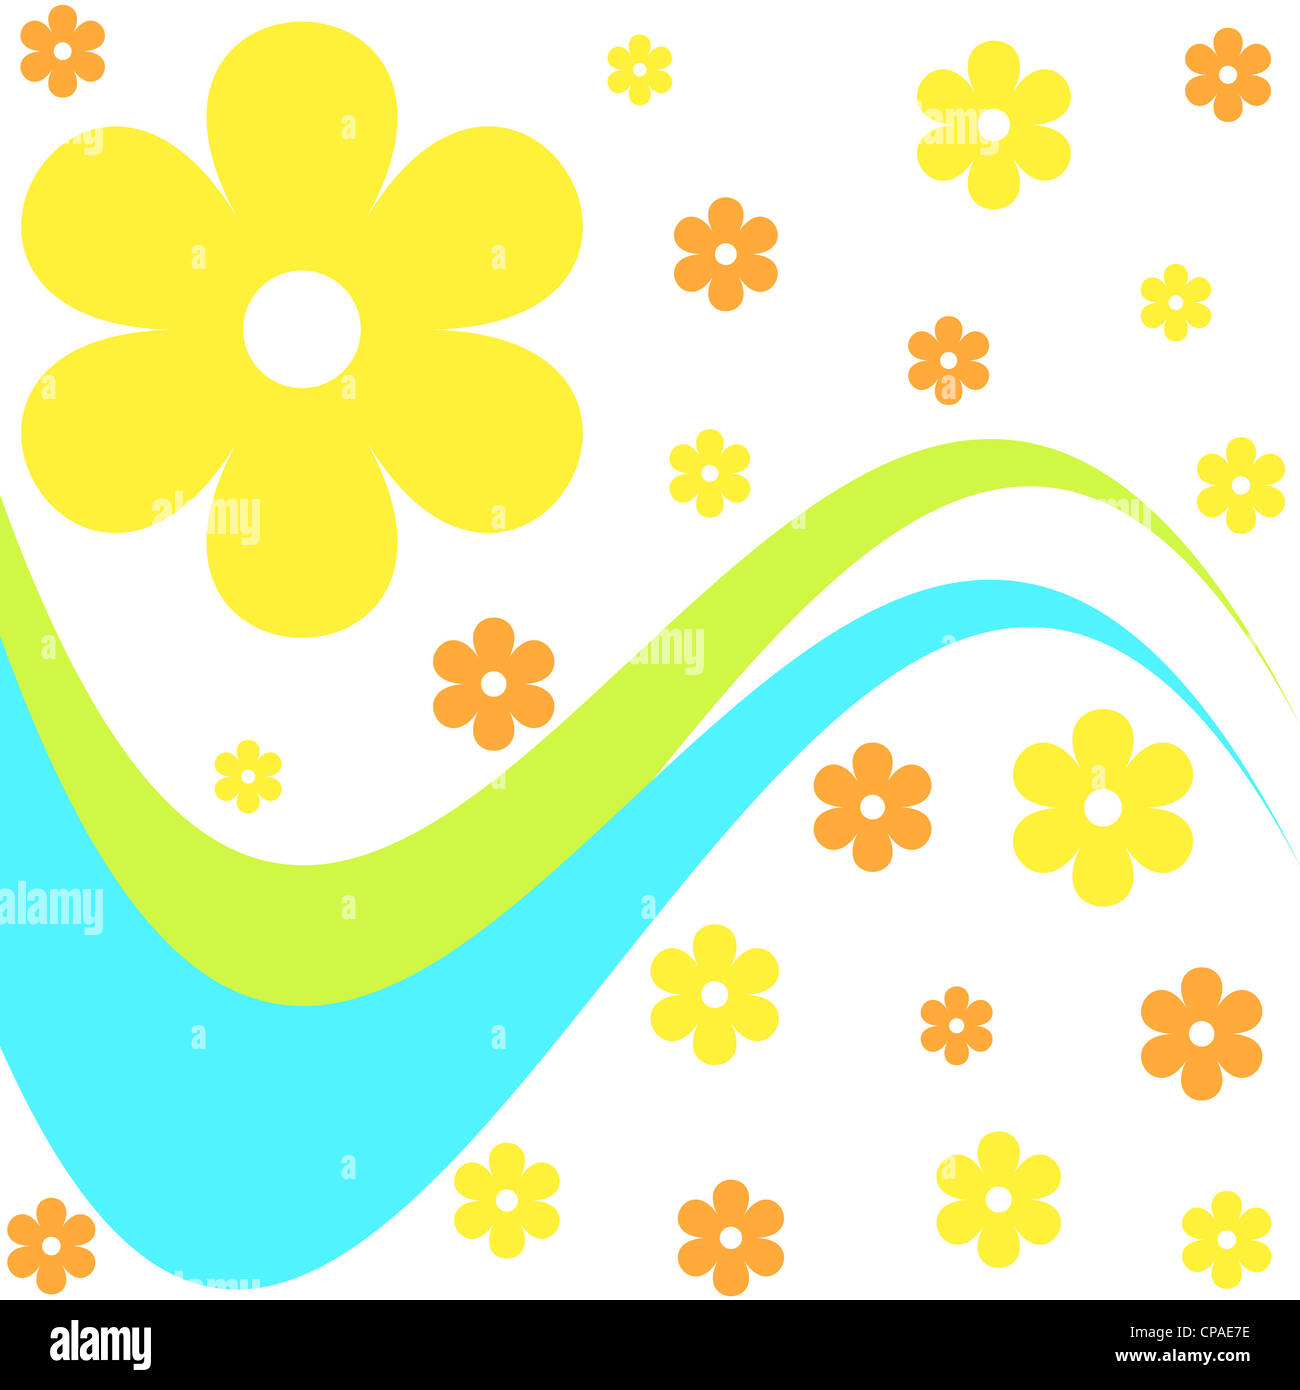 Funky flowers and curves design in bright colors Stock Photo